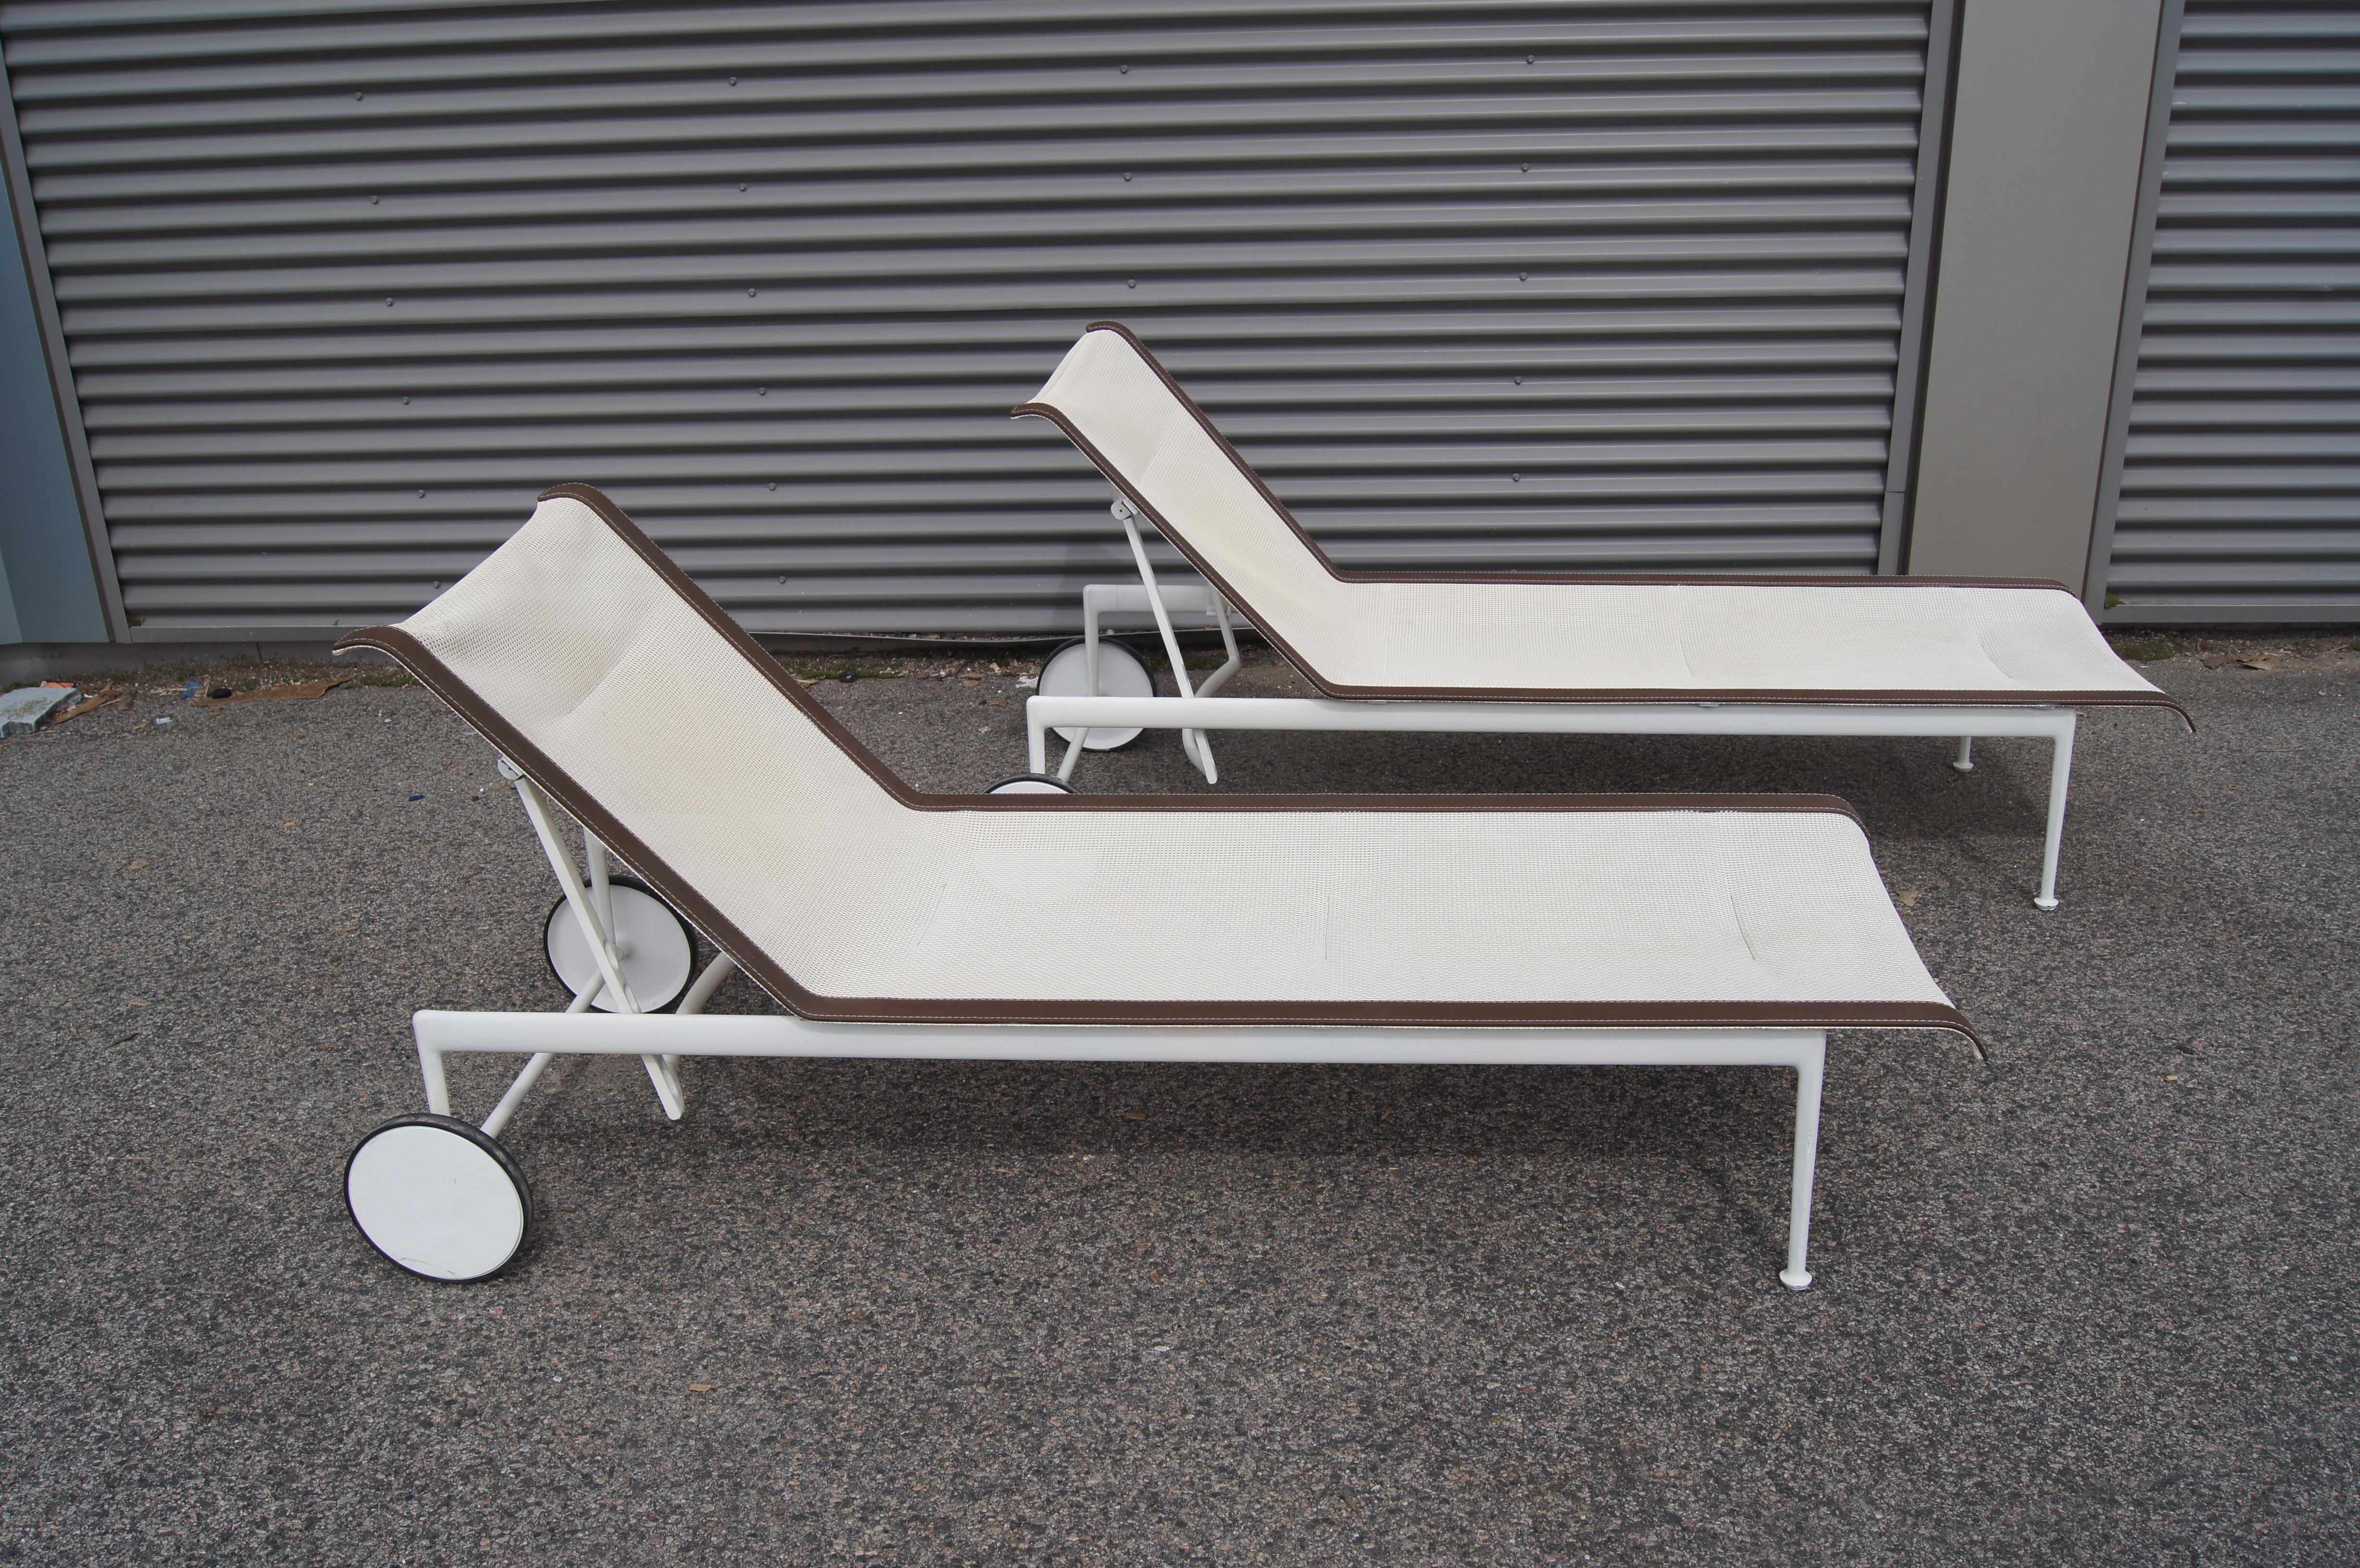 Richard Schultz originally designed his minimalist 1966 Collection of outdoor furniture for Florence Knoll's Florida residence. For this pair of chaise lounges slender frames of white powder-coated aluminum adjust along various angles of recline to